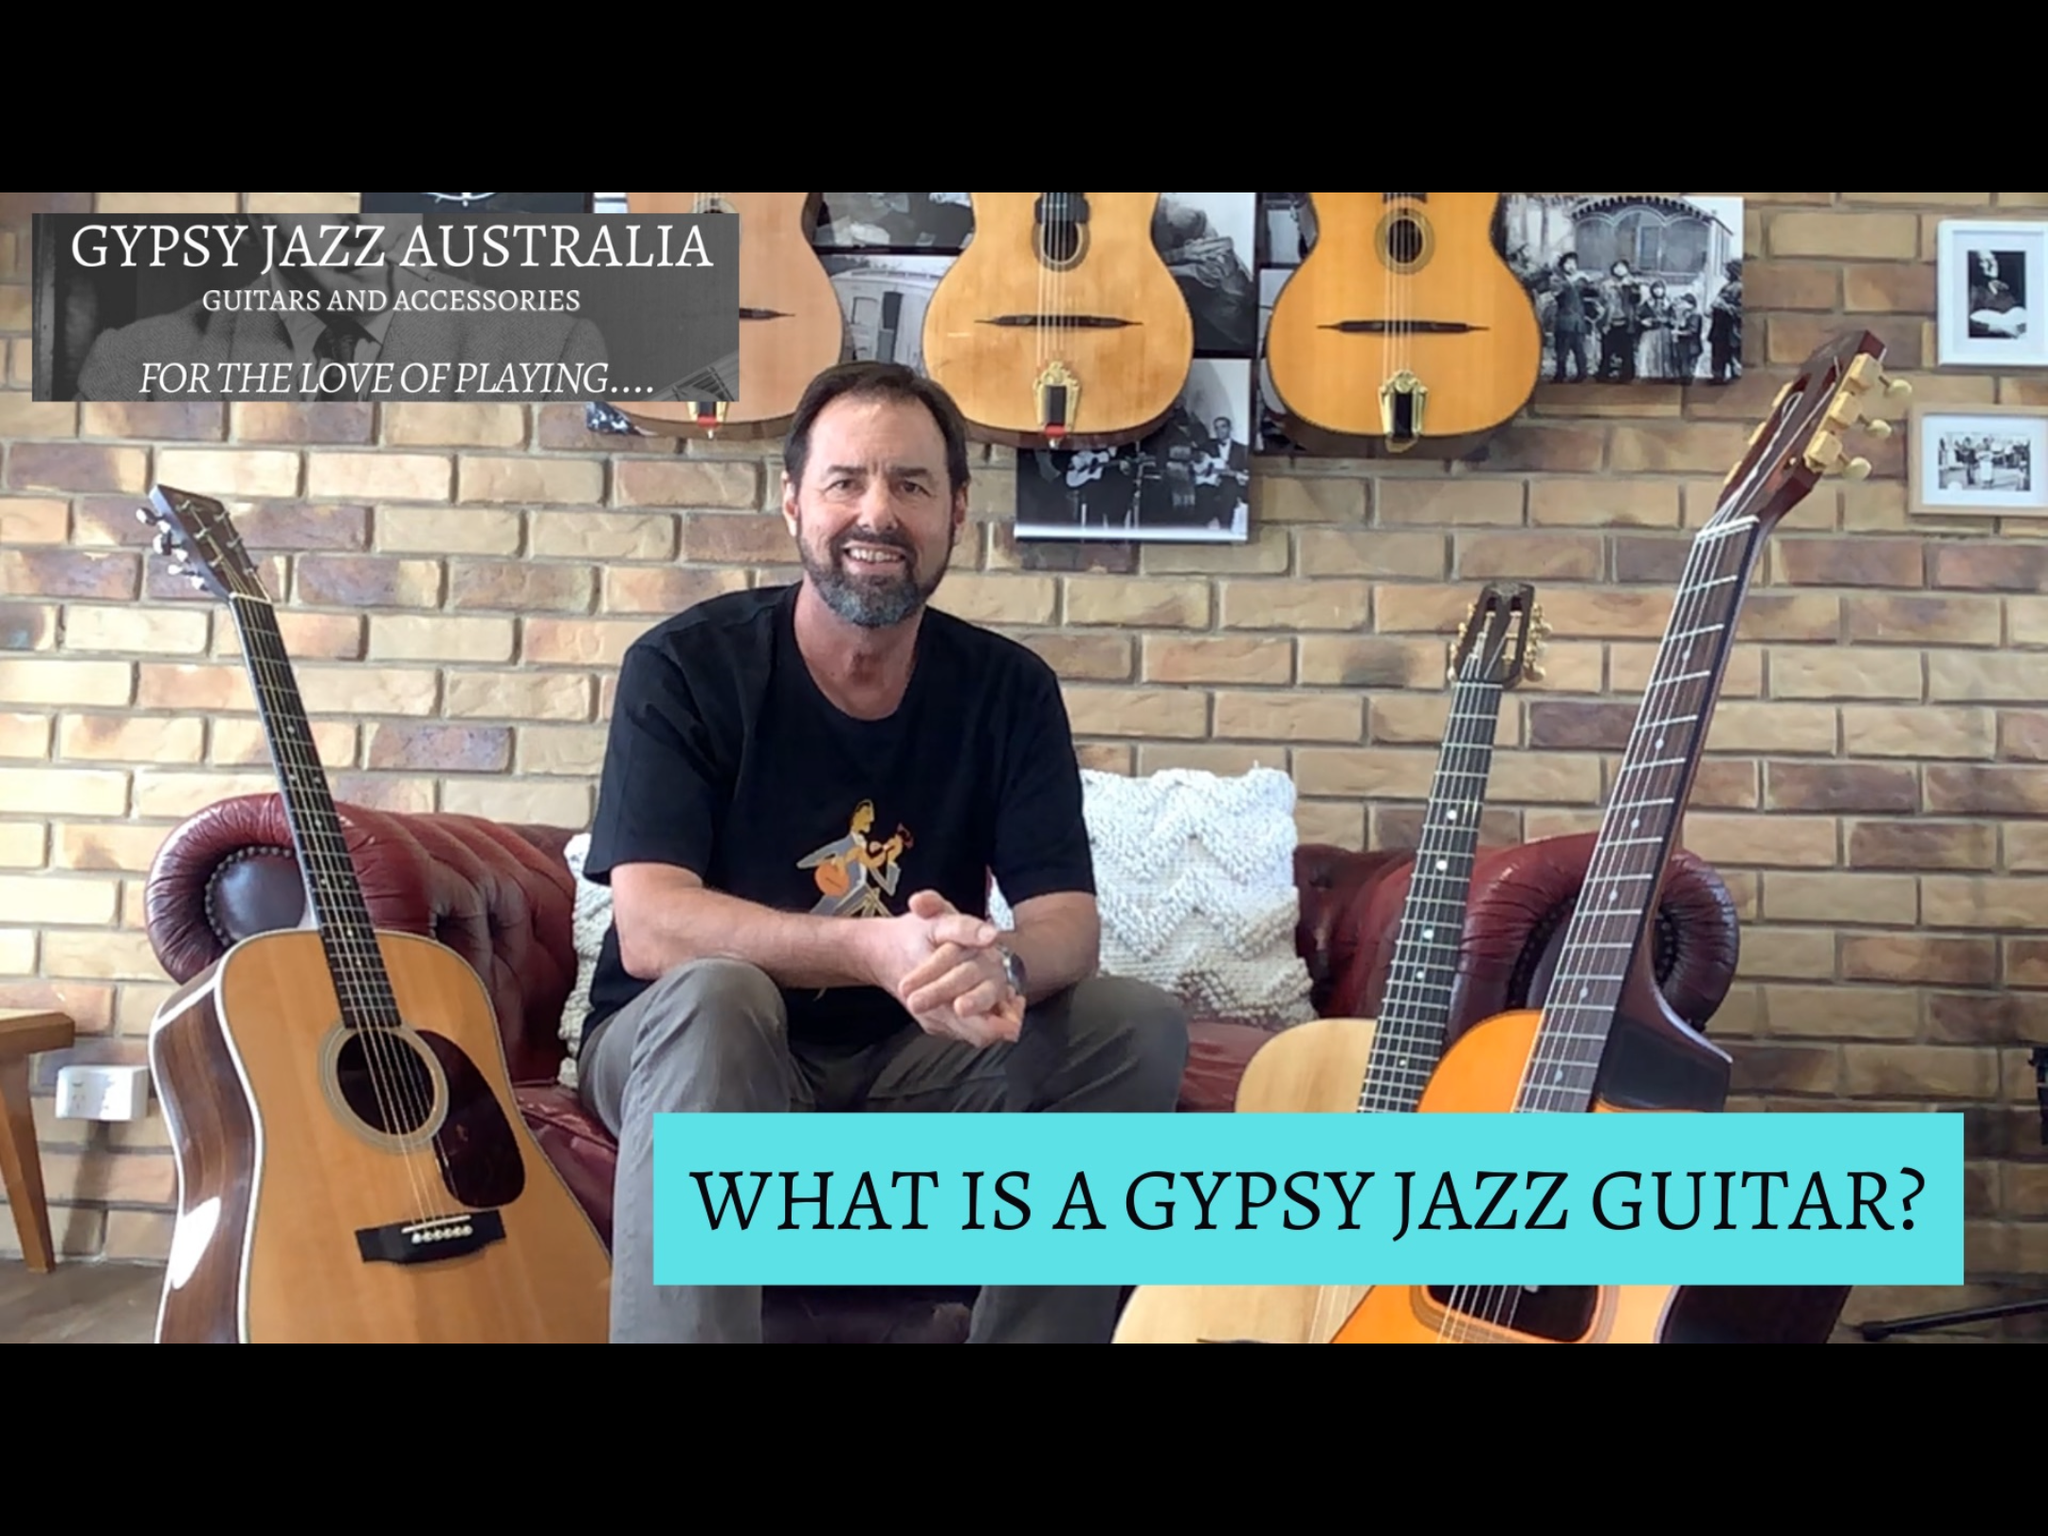 A video I made "What is a Gypsy Jazz Guitar".